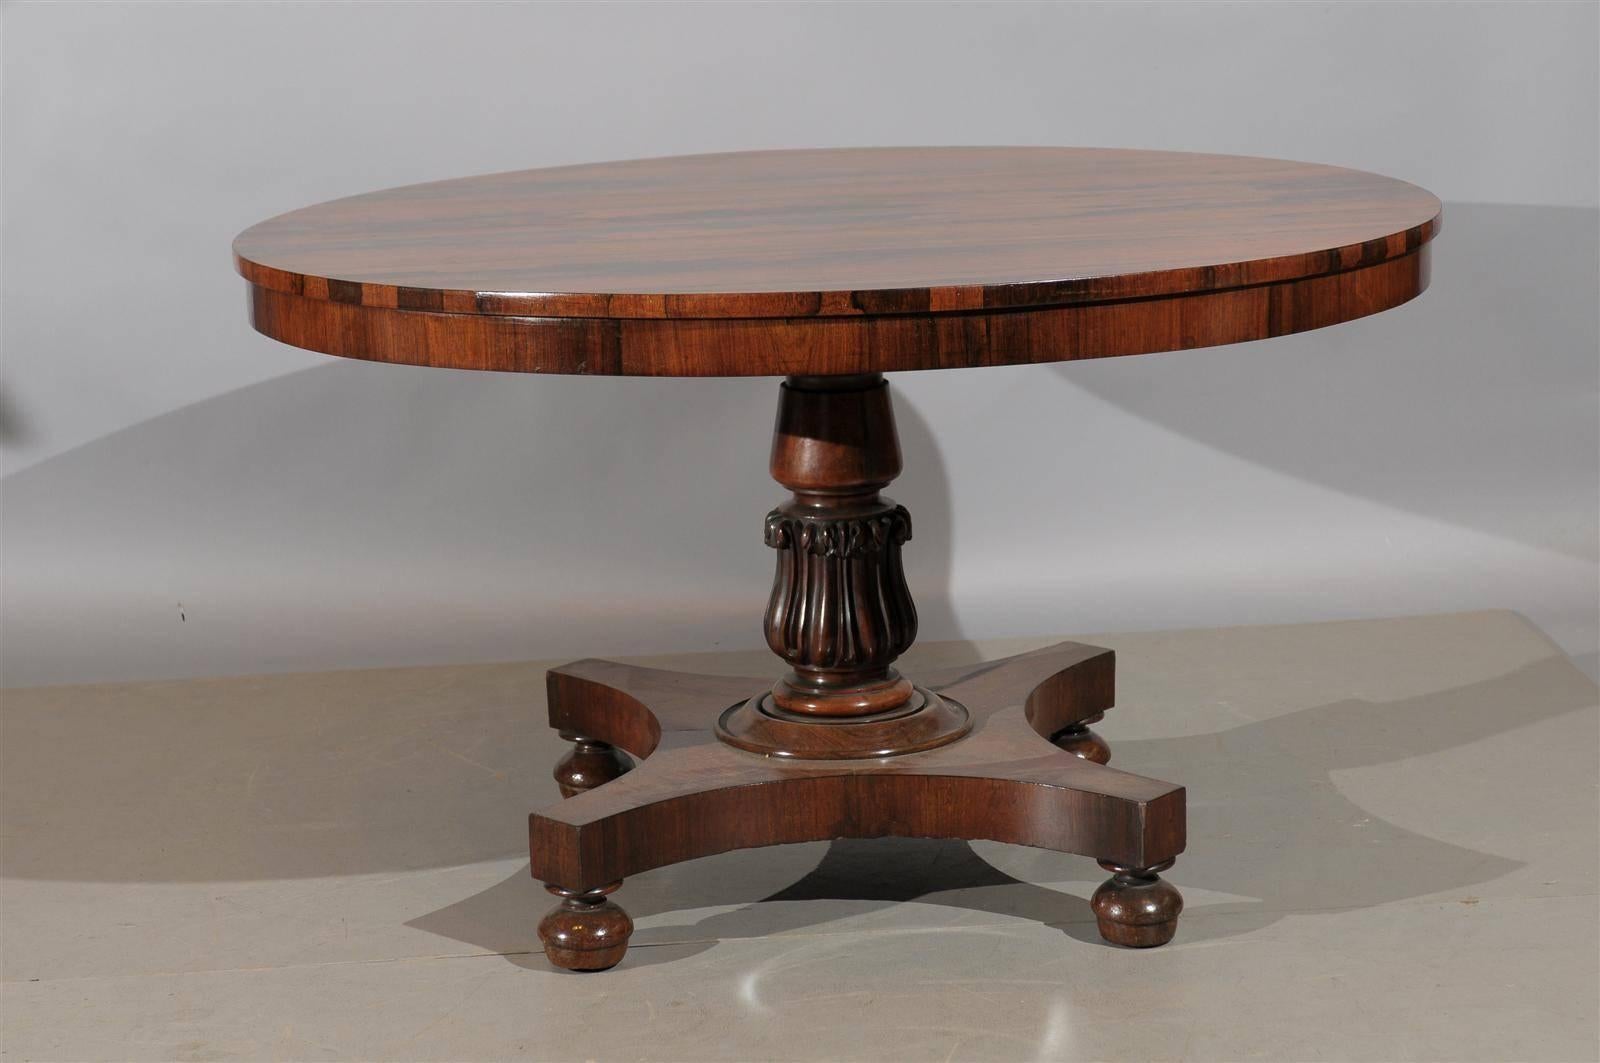 19th century English Regency rosewood center table with pedestal base and bun feet.